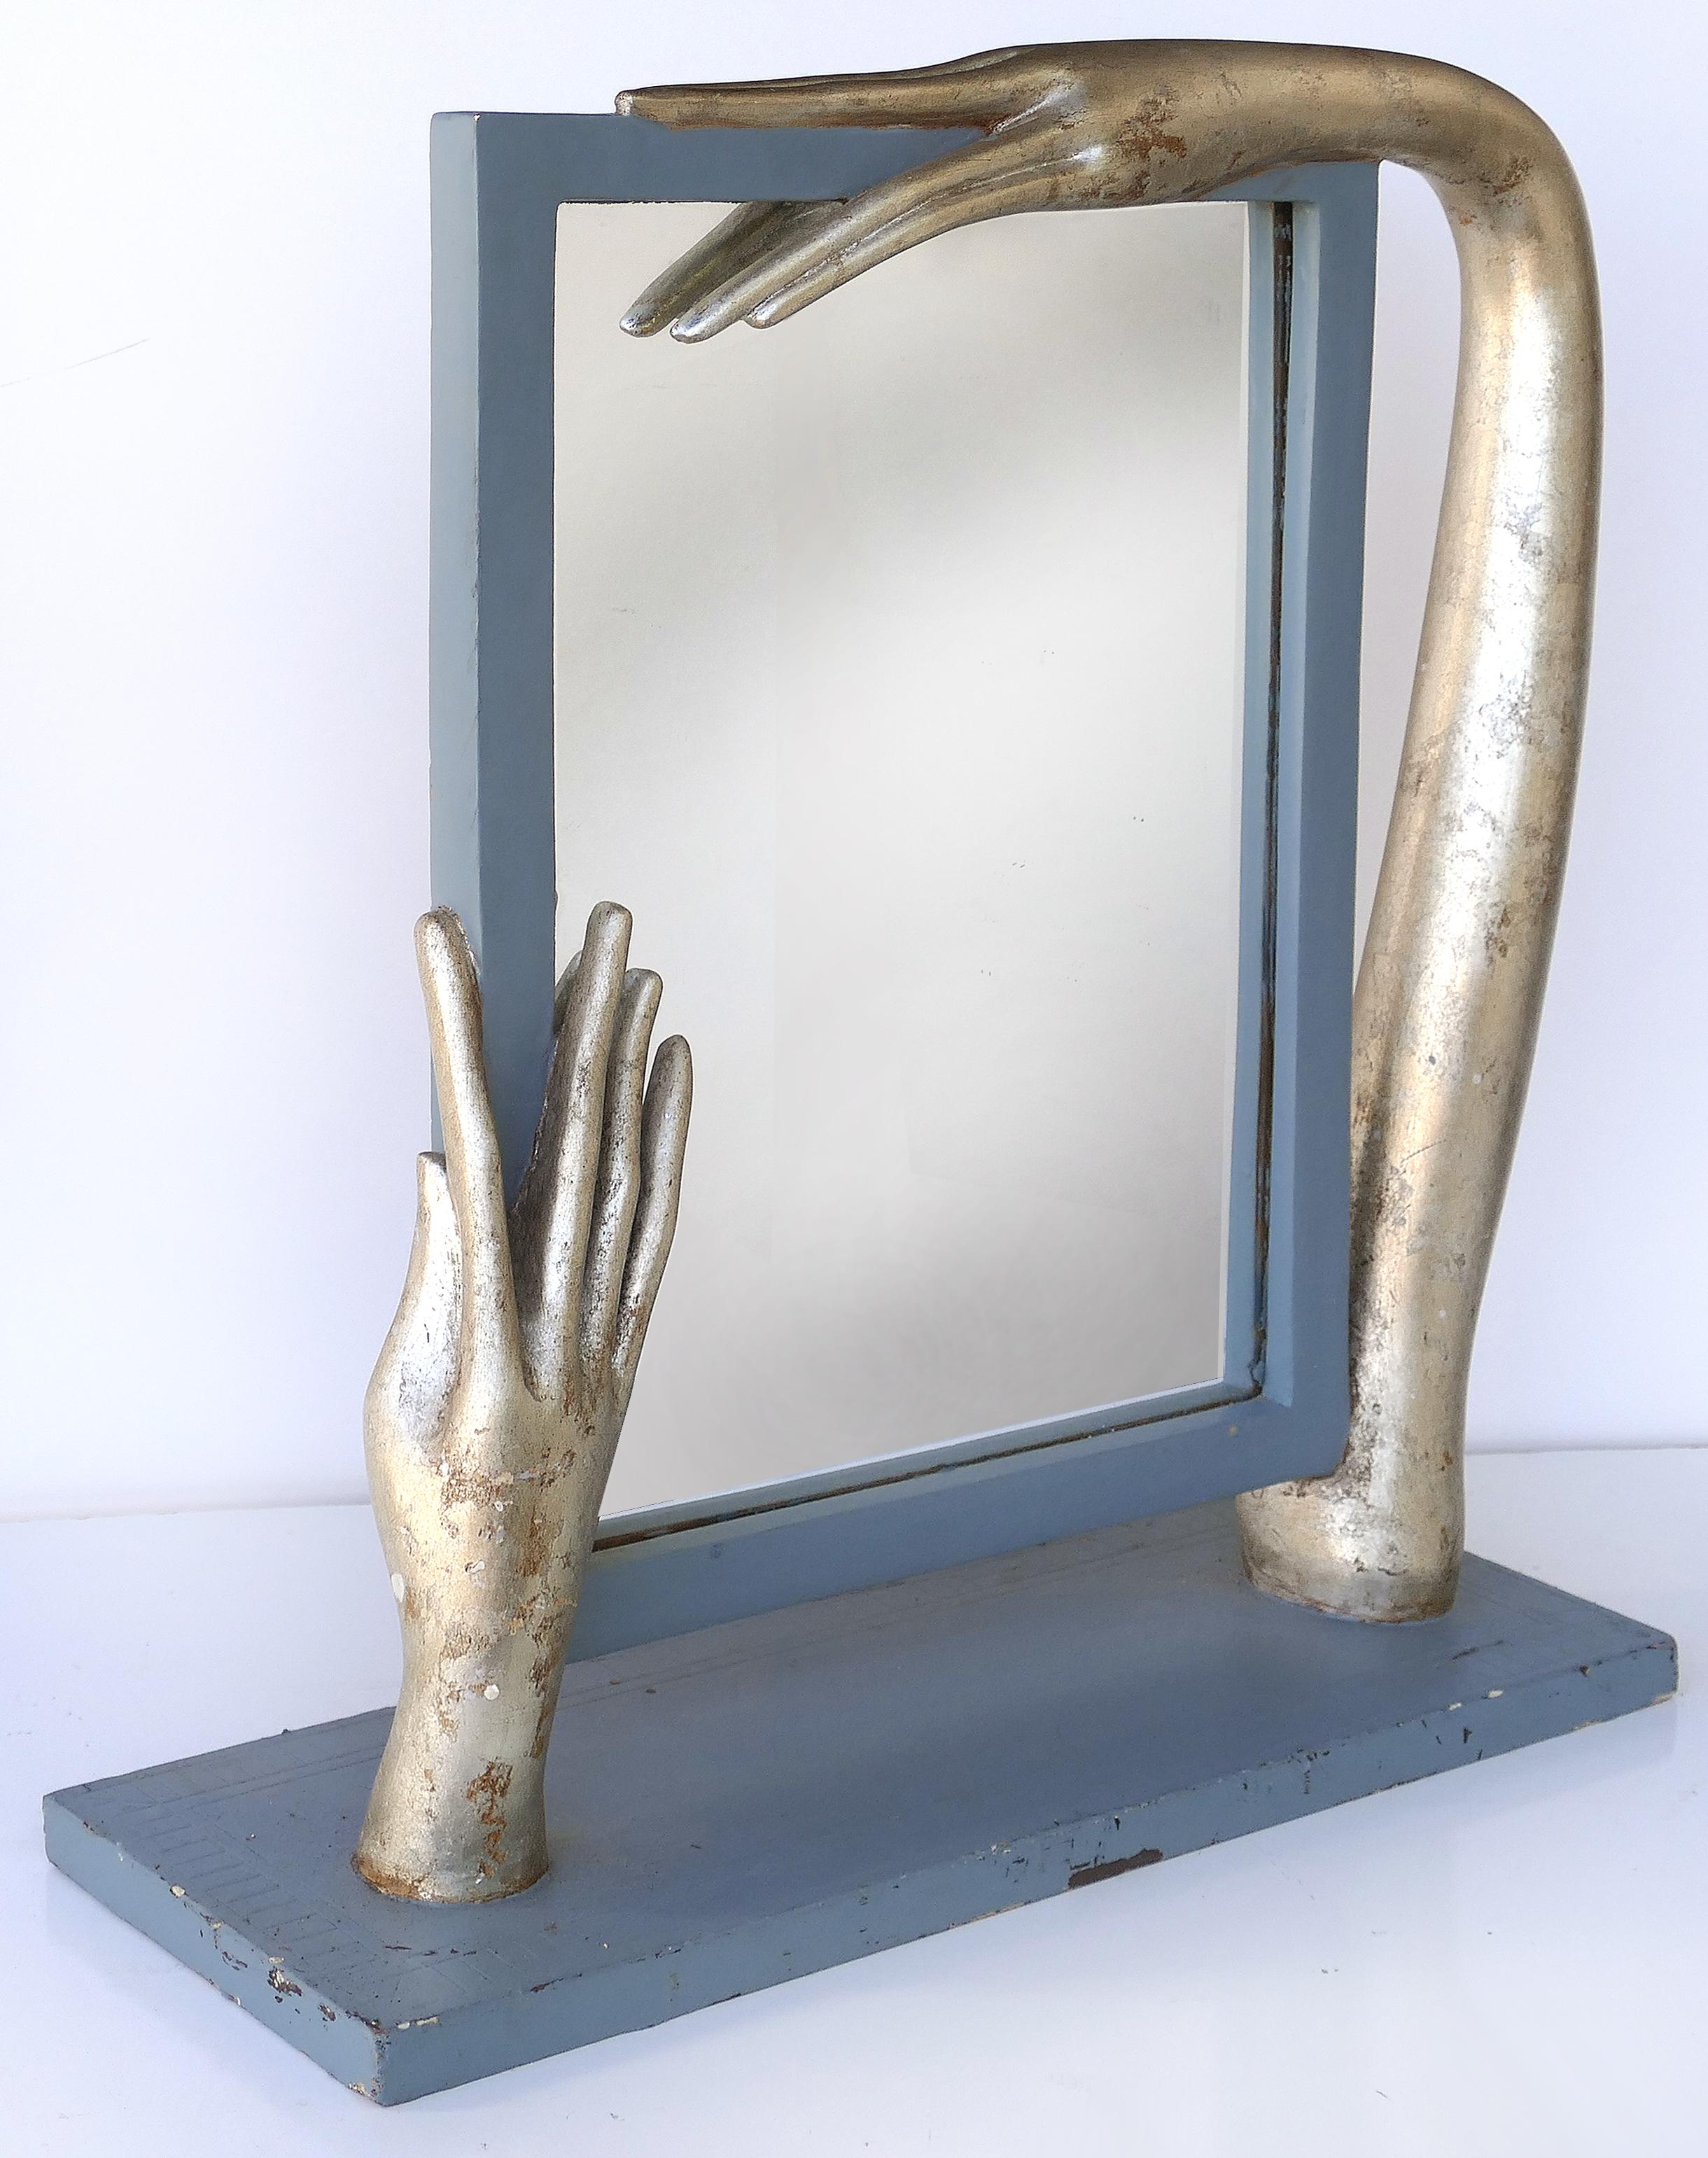 Surrealist carved wood table standing mirror

Offered for sale is a Surrealist carved wood table mirror with silver leaf hand details. This sculptural mirror shows movement through the exaggerated stylized carved hands. This is juxtaposed to a